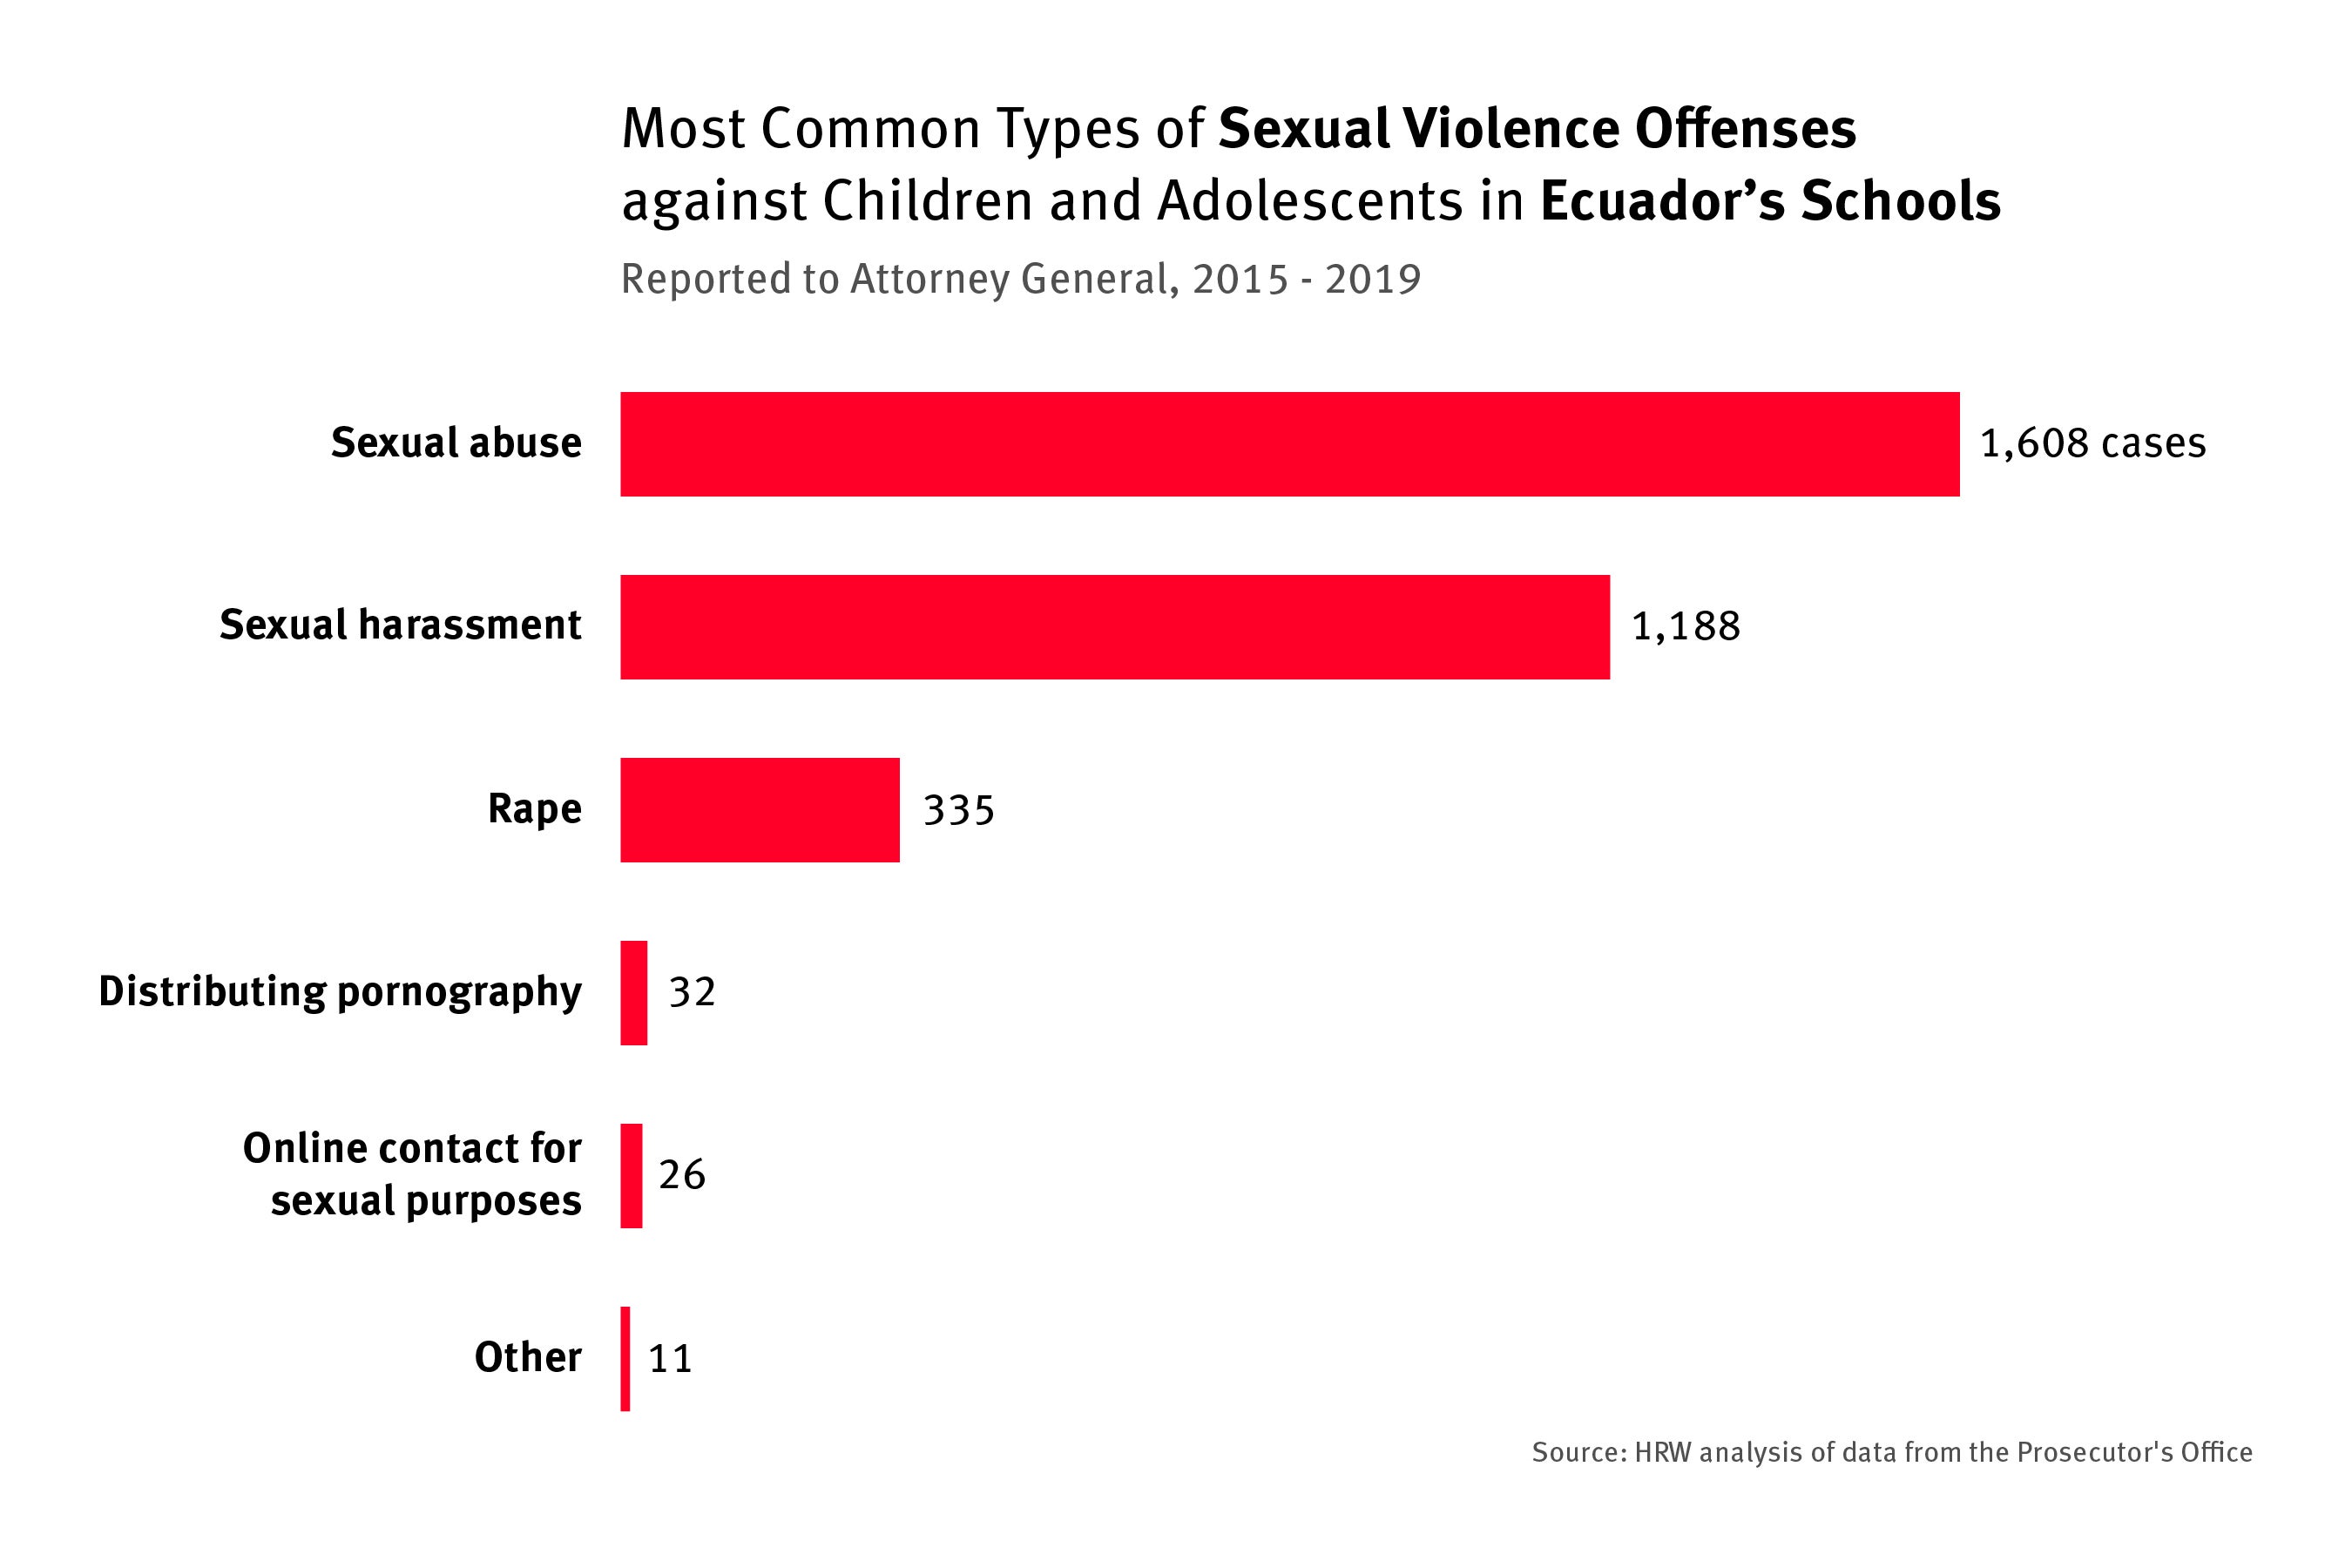 A bar graph that breaks down the most common types of sexual violence offenses against children and adolescents in Ecuador's schools